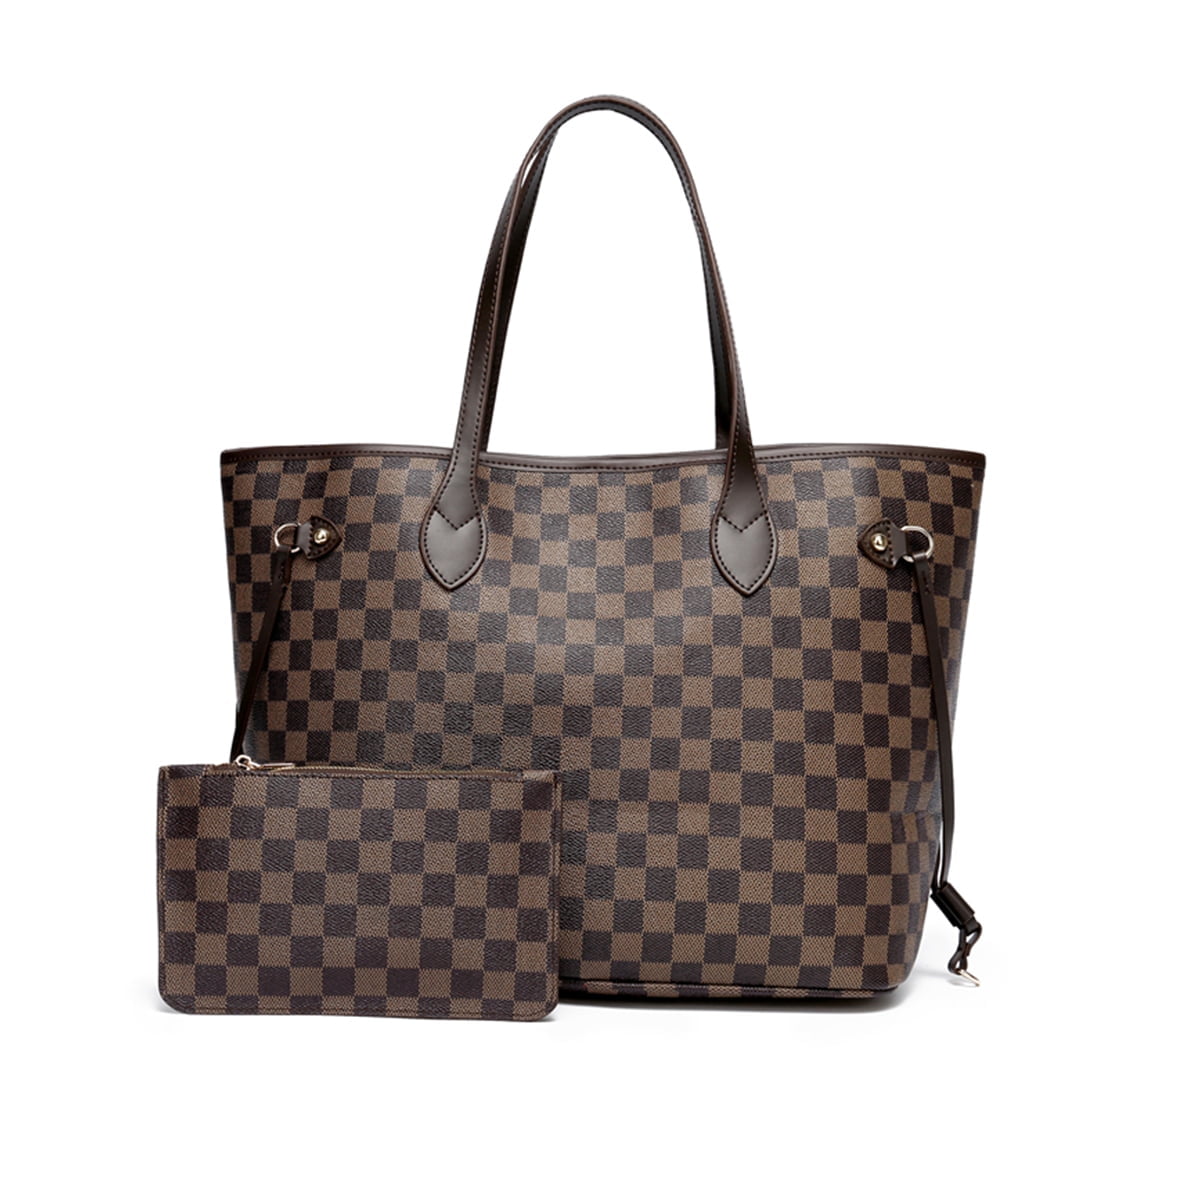 Twenty Four Women's Handbag Checkered Shoulder Bag Tote Fashion Casual Bag  -Leather (Checkered Brown) Mothers Day Gifts